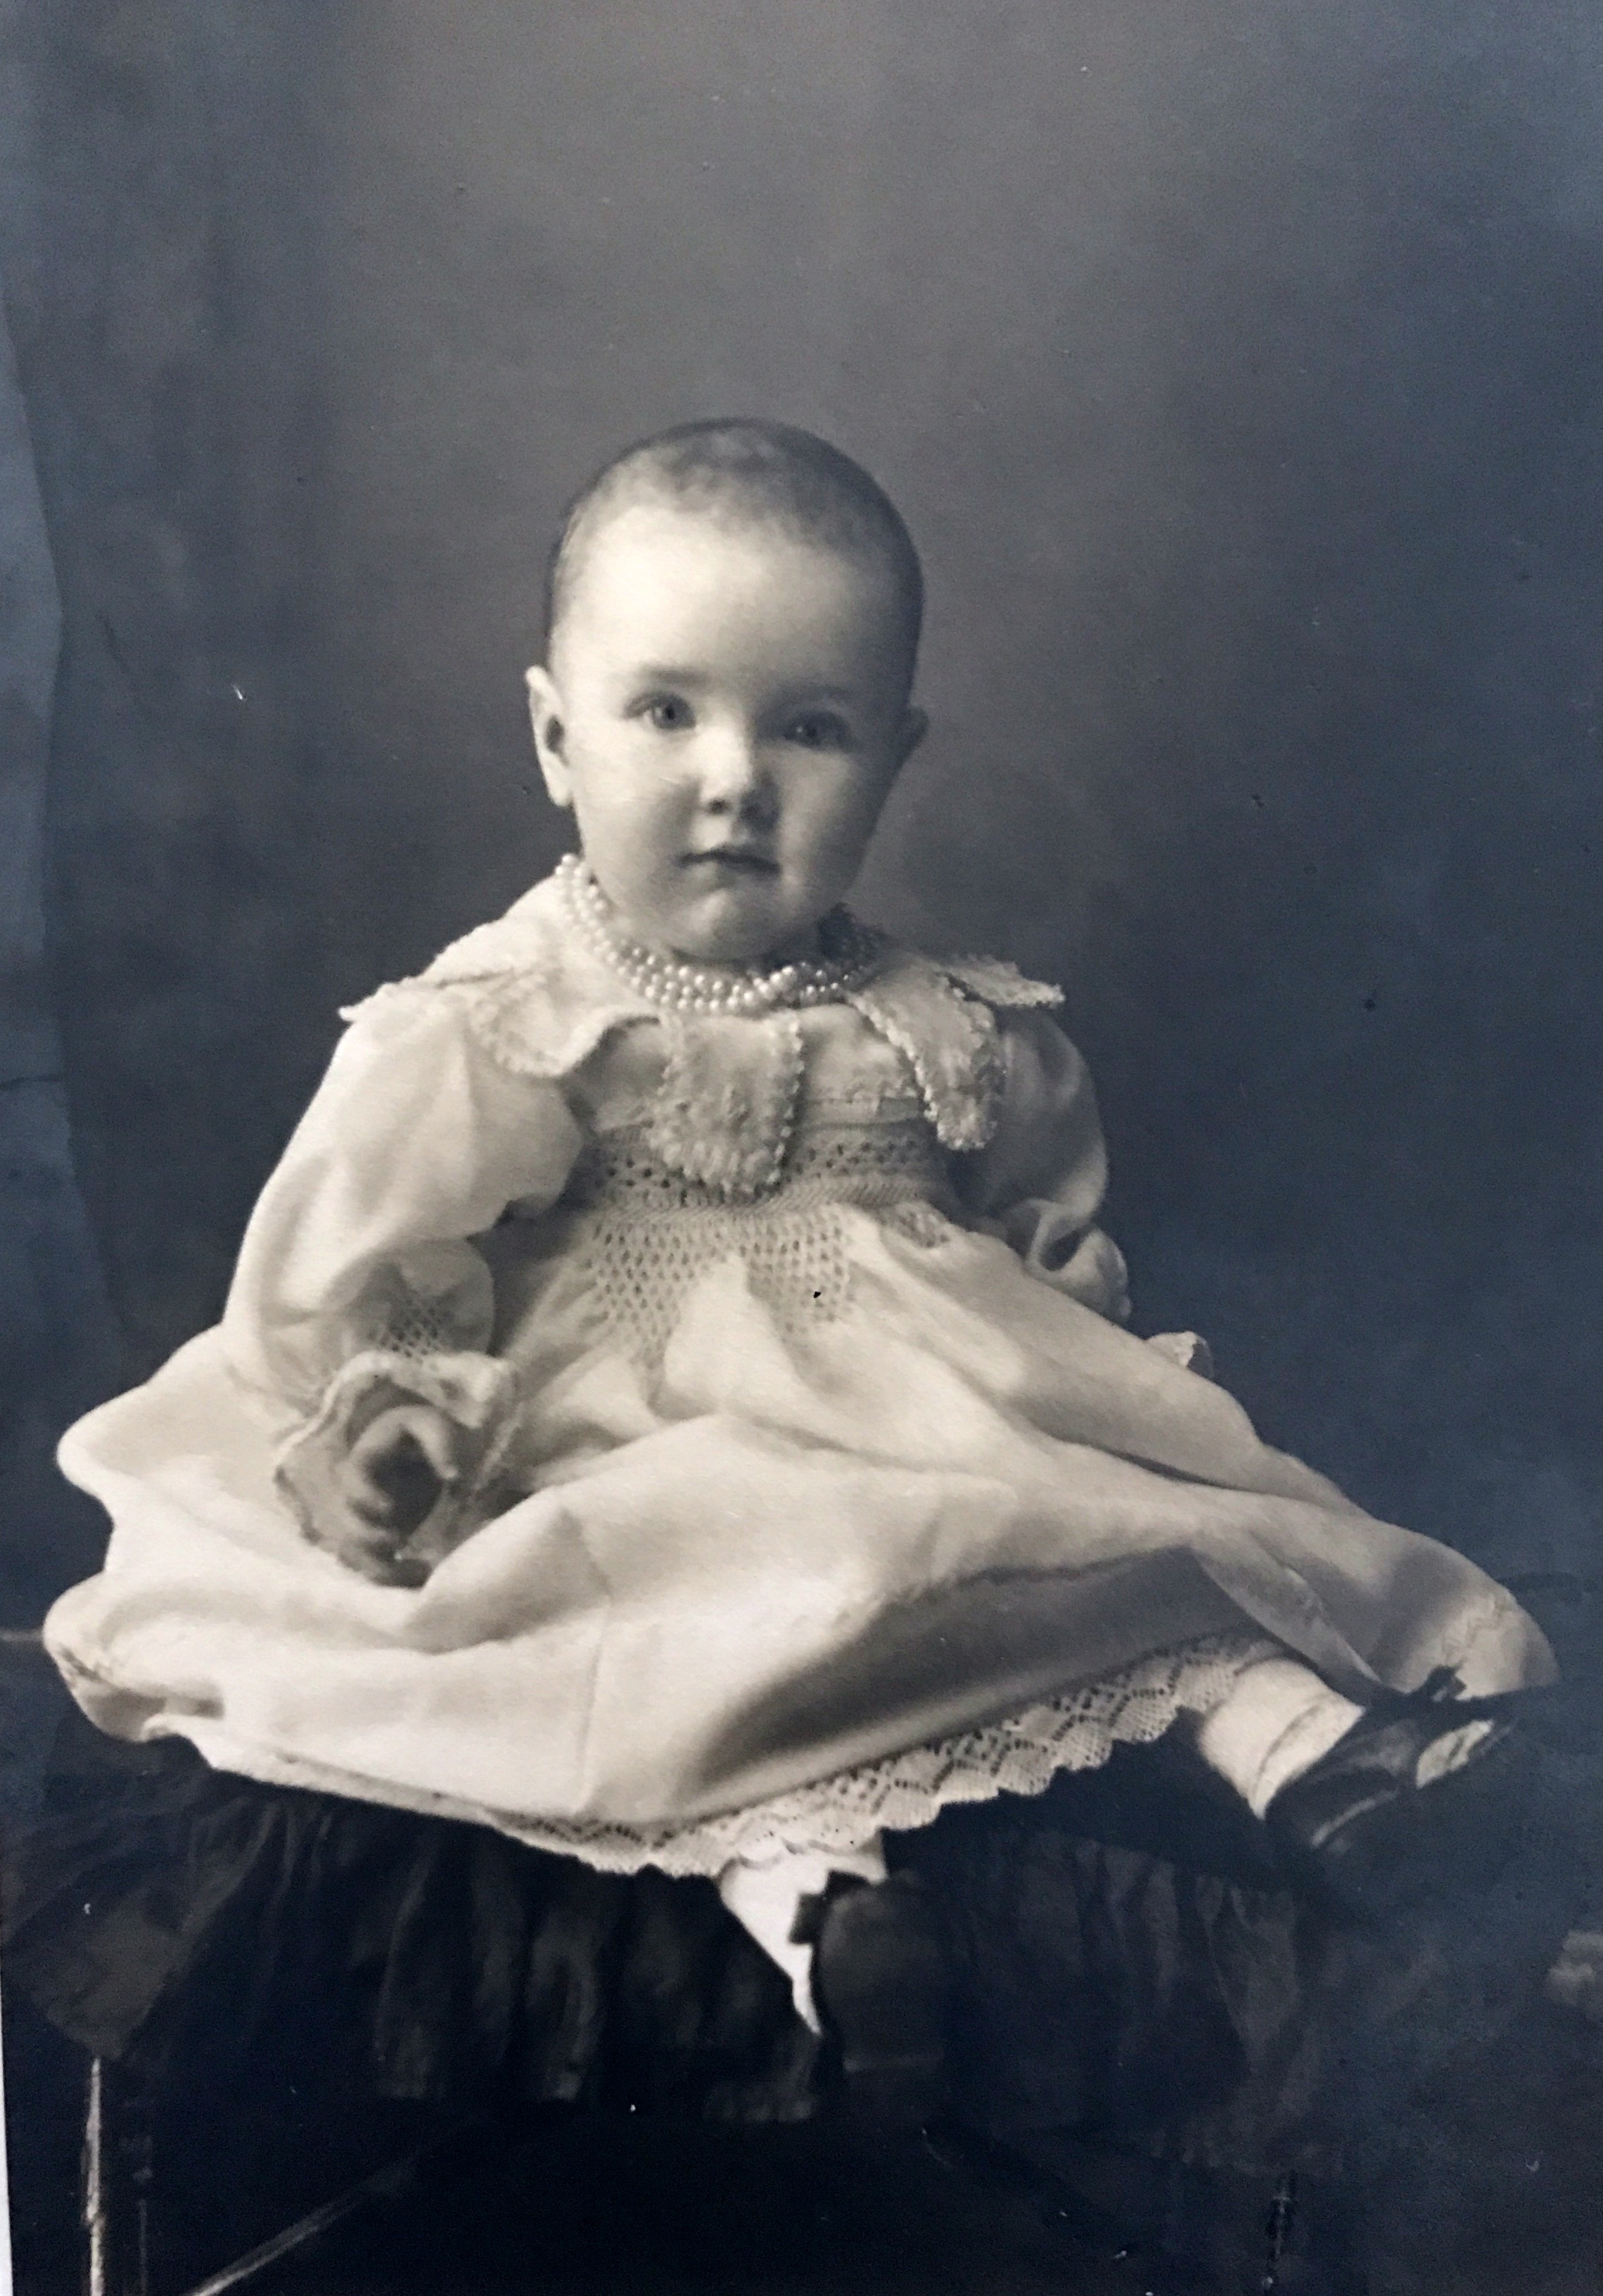 Baby Mary, born 1913 died 1974